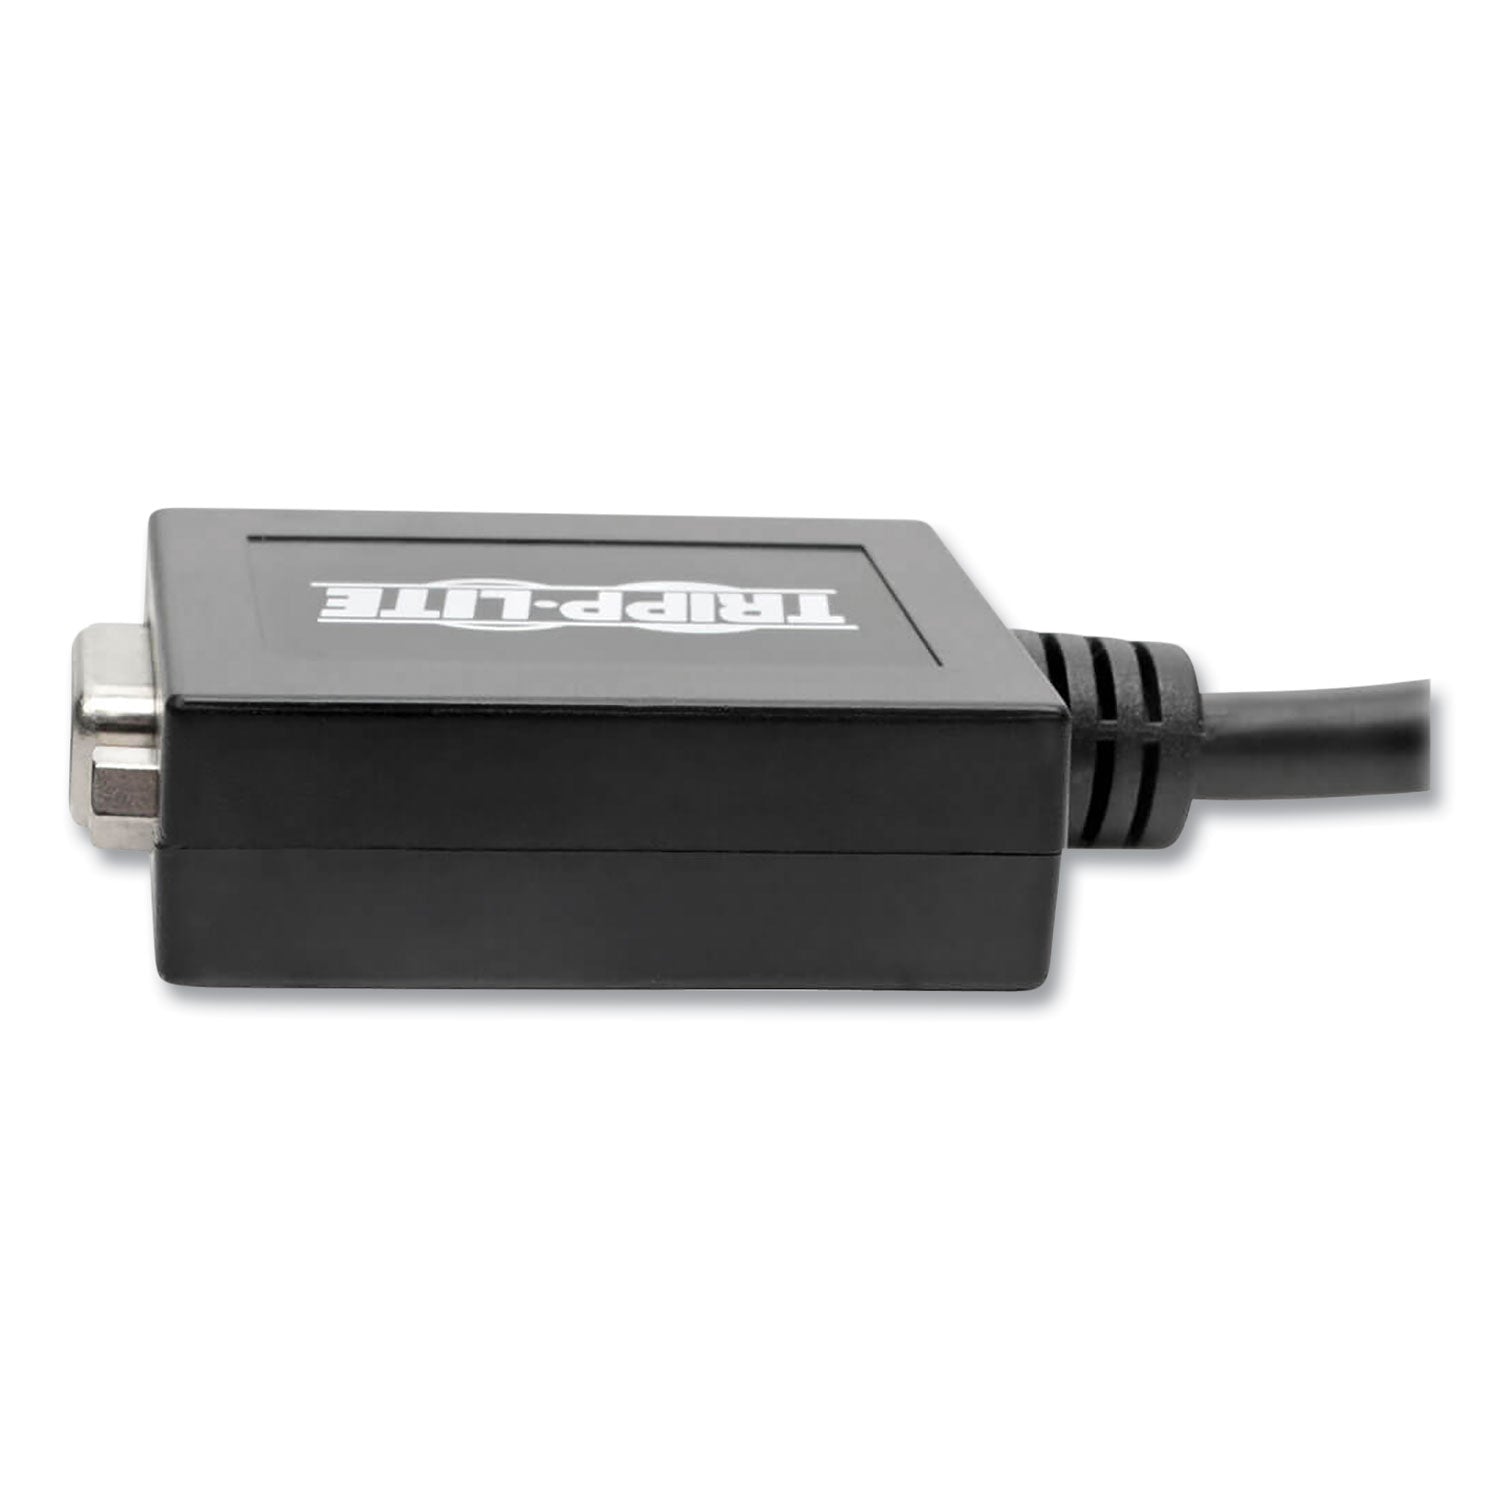 hdmi-to-vga-with-audio-converter-cable-6-black_trpp13106n - 7